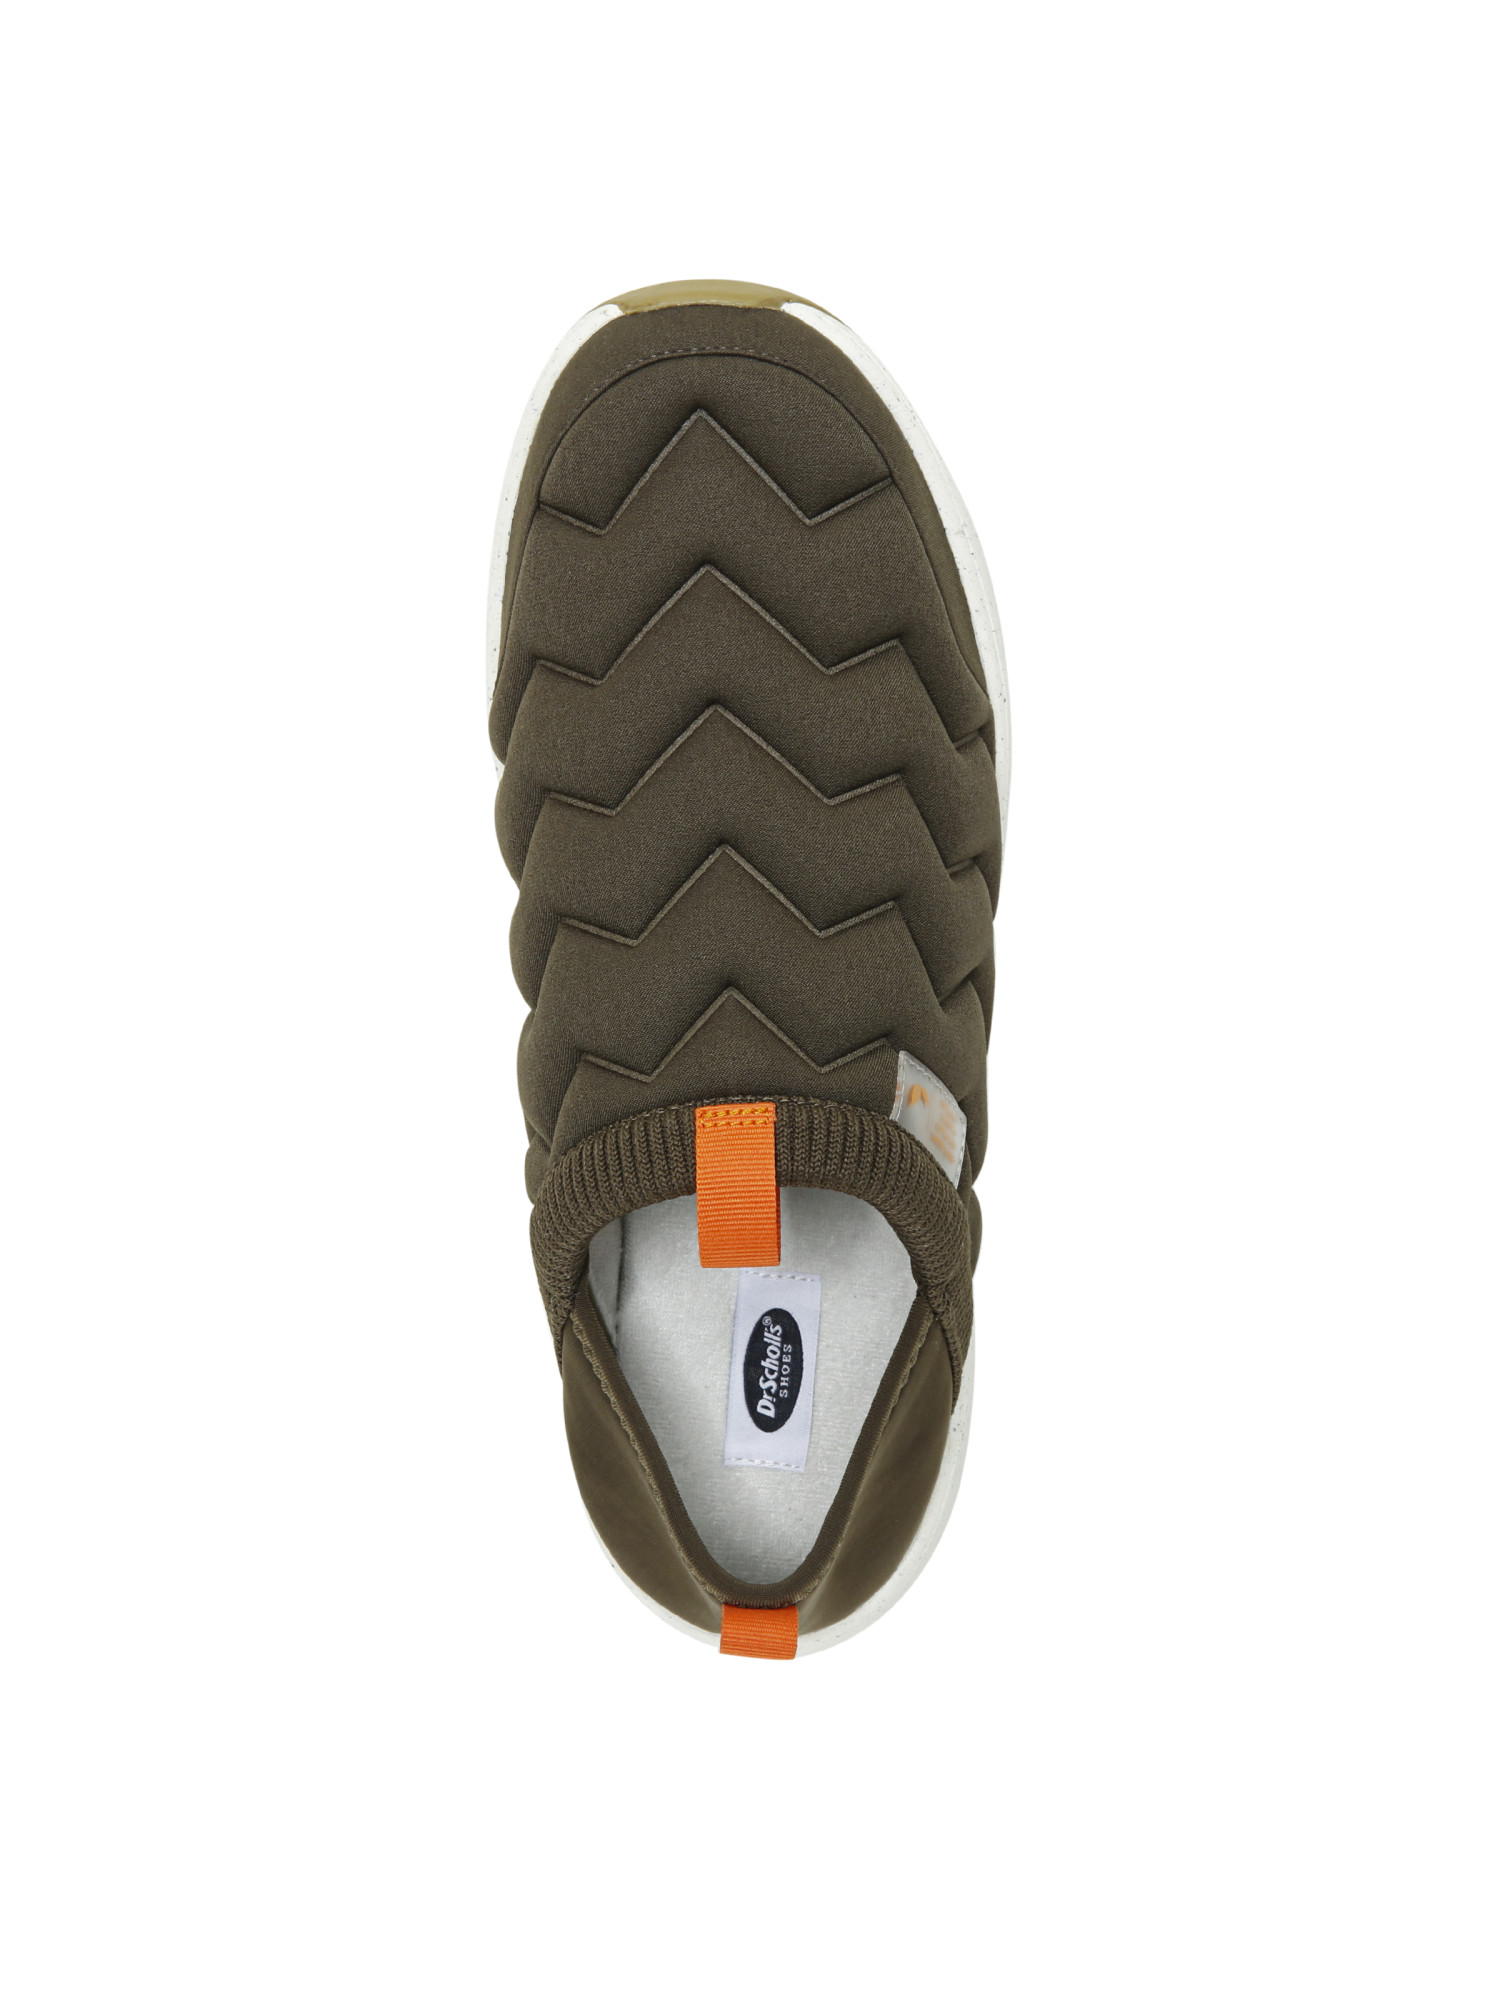 Dr. Scholl's Men's Home and Out Slip on Sneaker - image 5 of 6